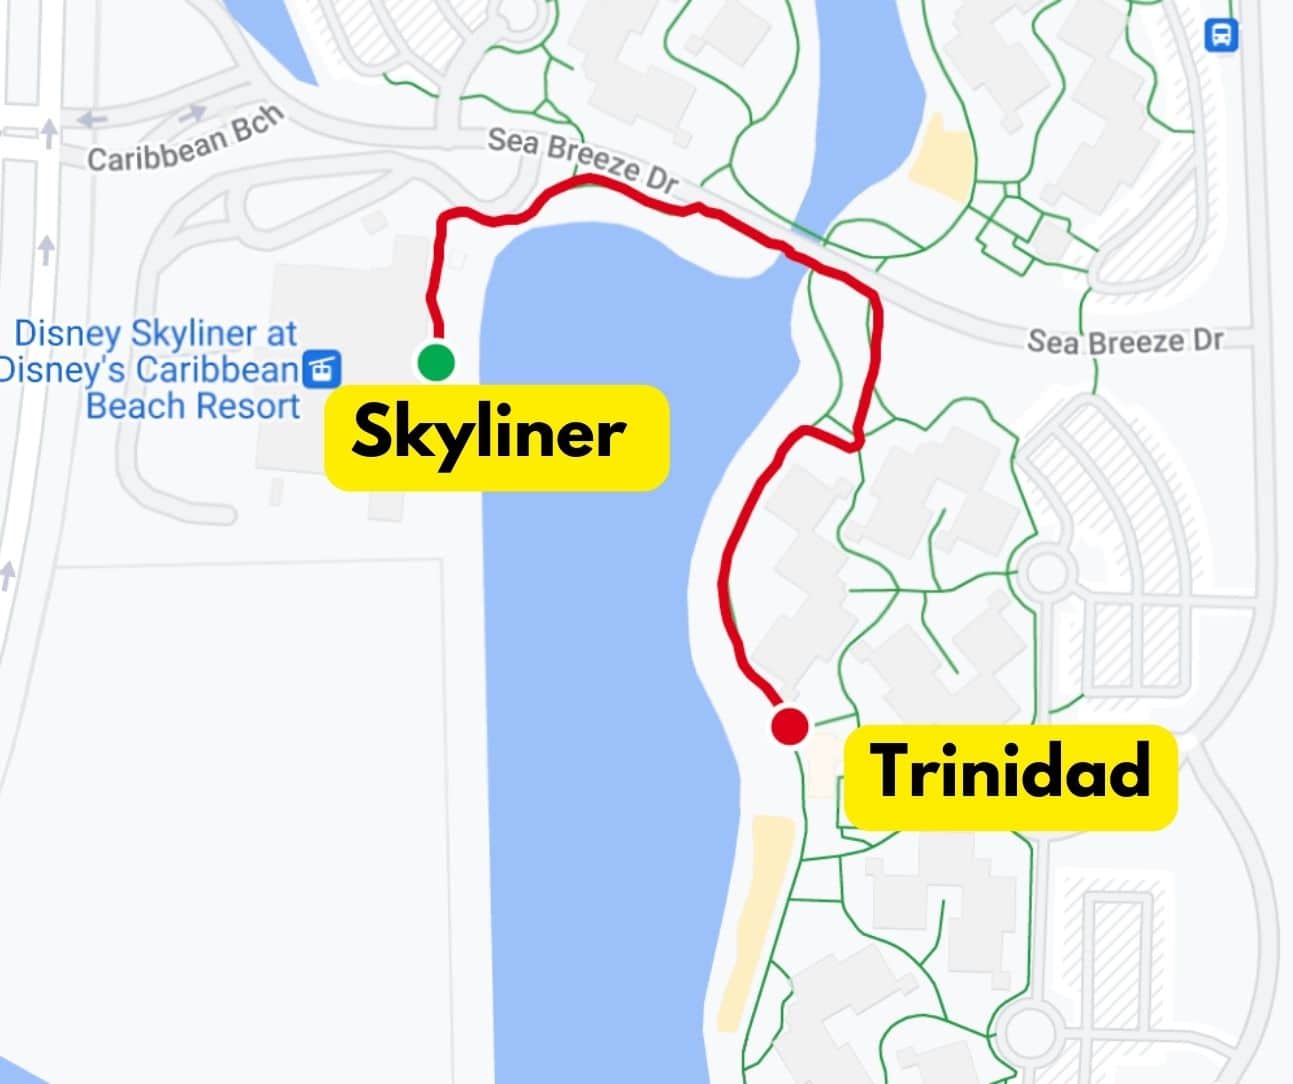 walking distance from the Skyliner to Trinidad 